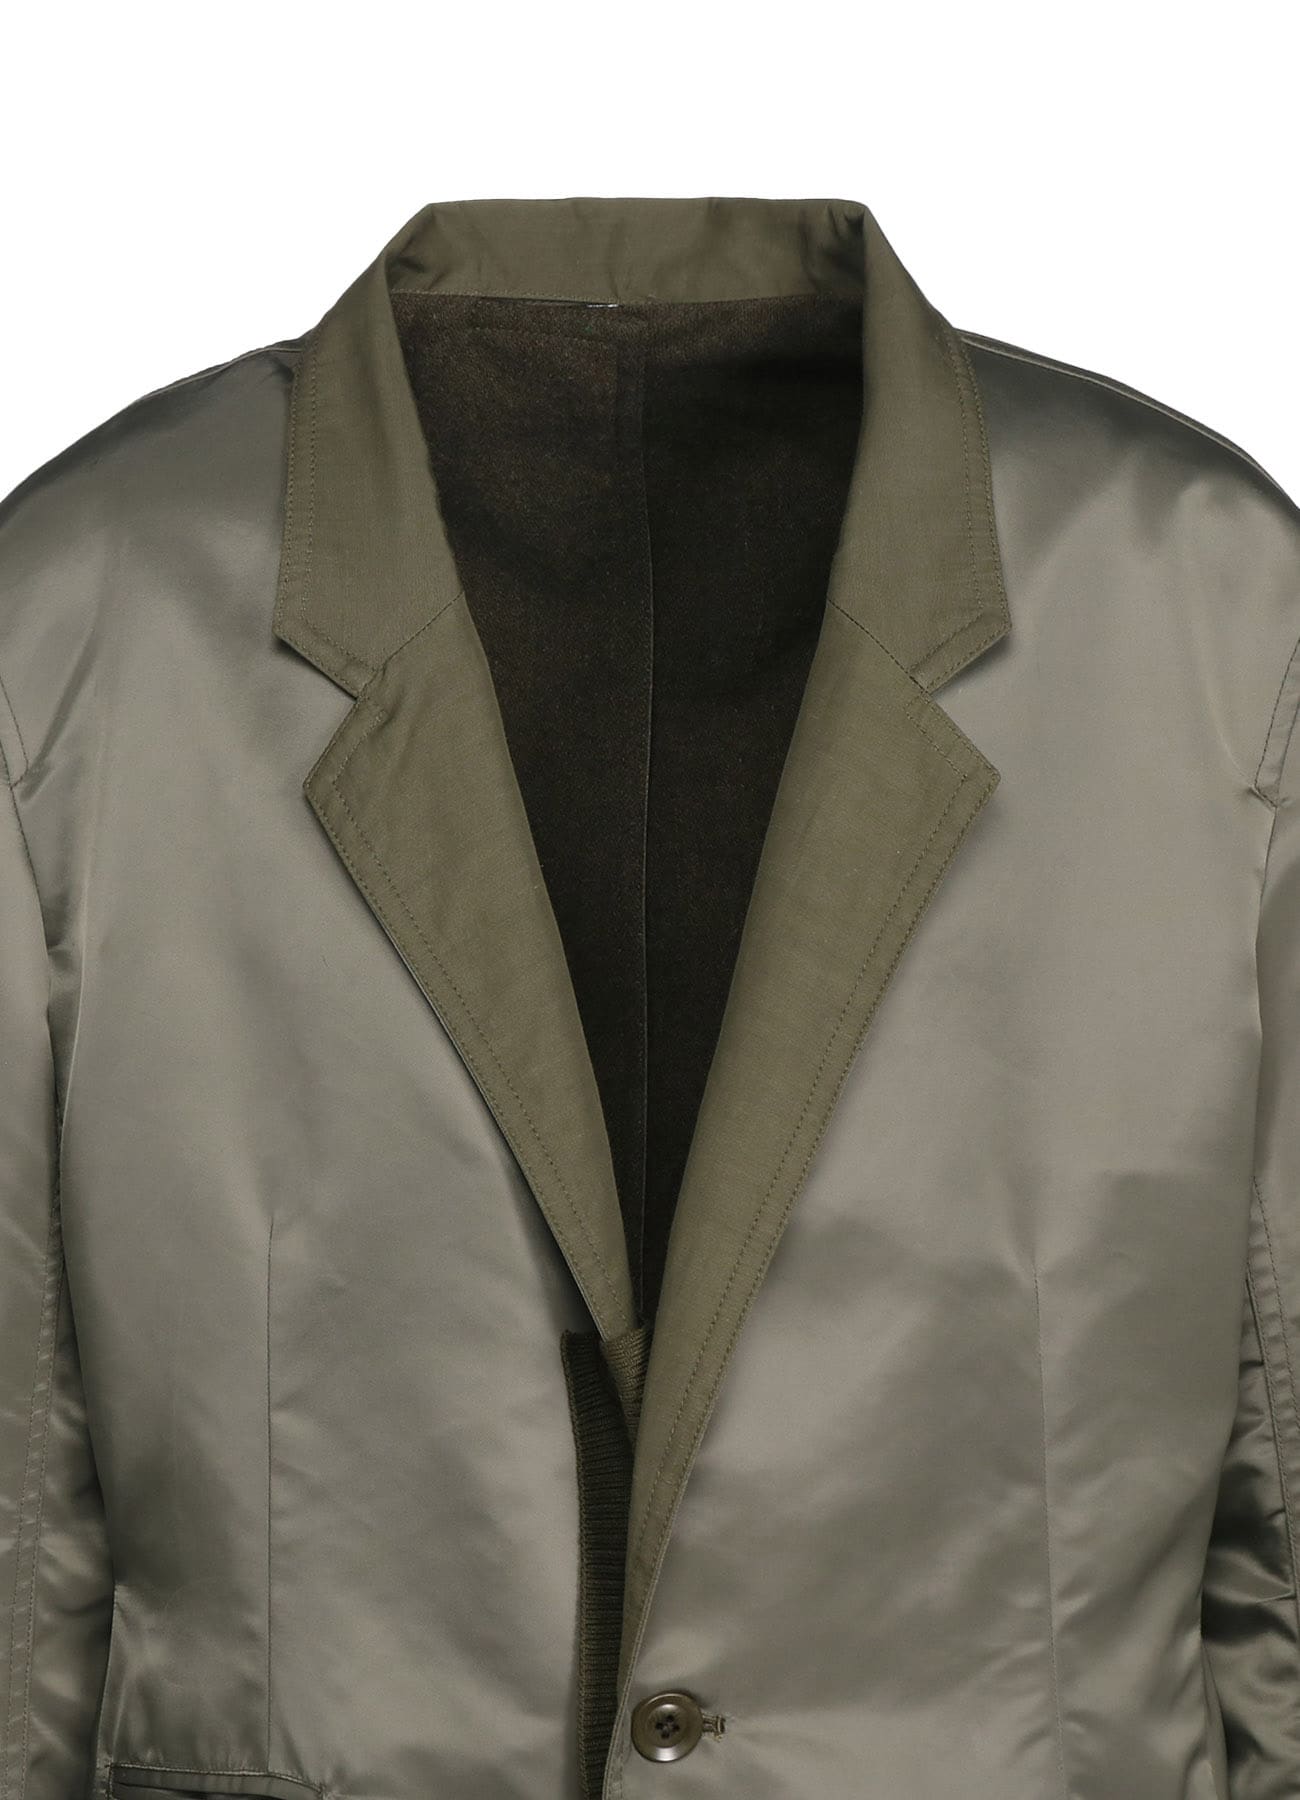 VARIOUS MATERIAL COMBINATION JACKET BACK EXTRA MATERIAL DESIGN